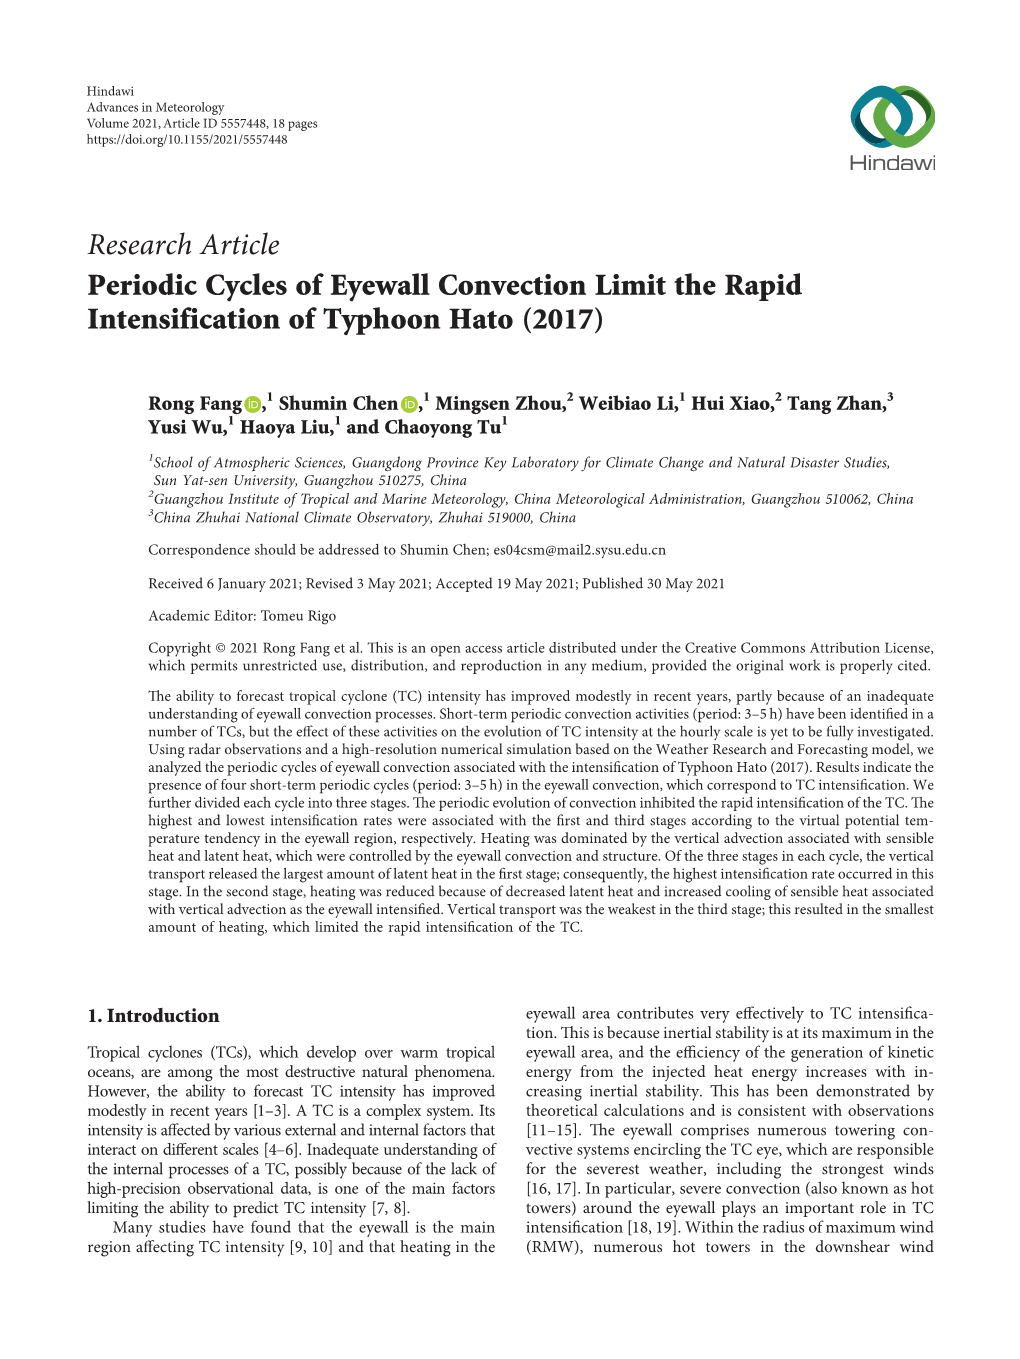 Periodic Cycles of Eyewall Convection Limit the Rapid Intensification of Typhoon Hato (2017)